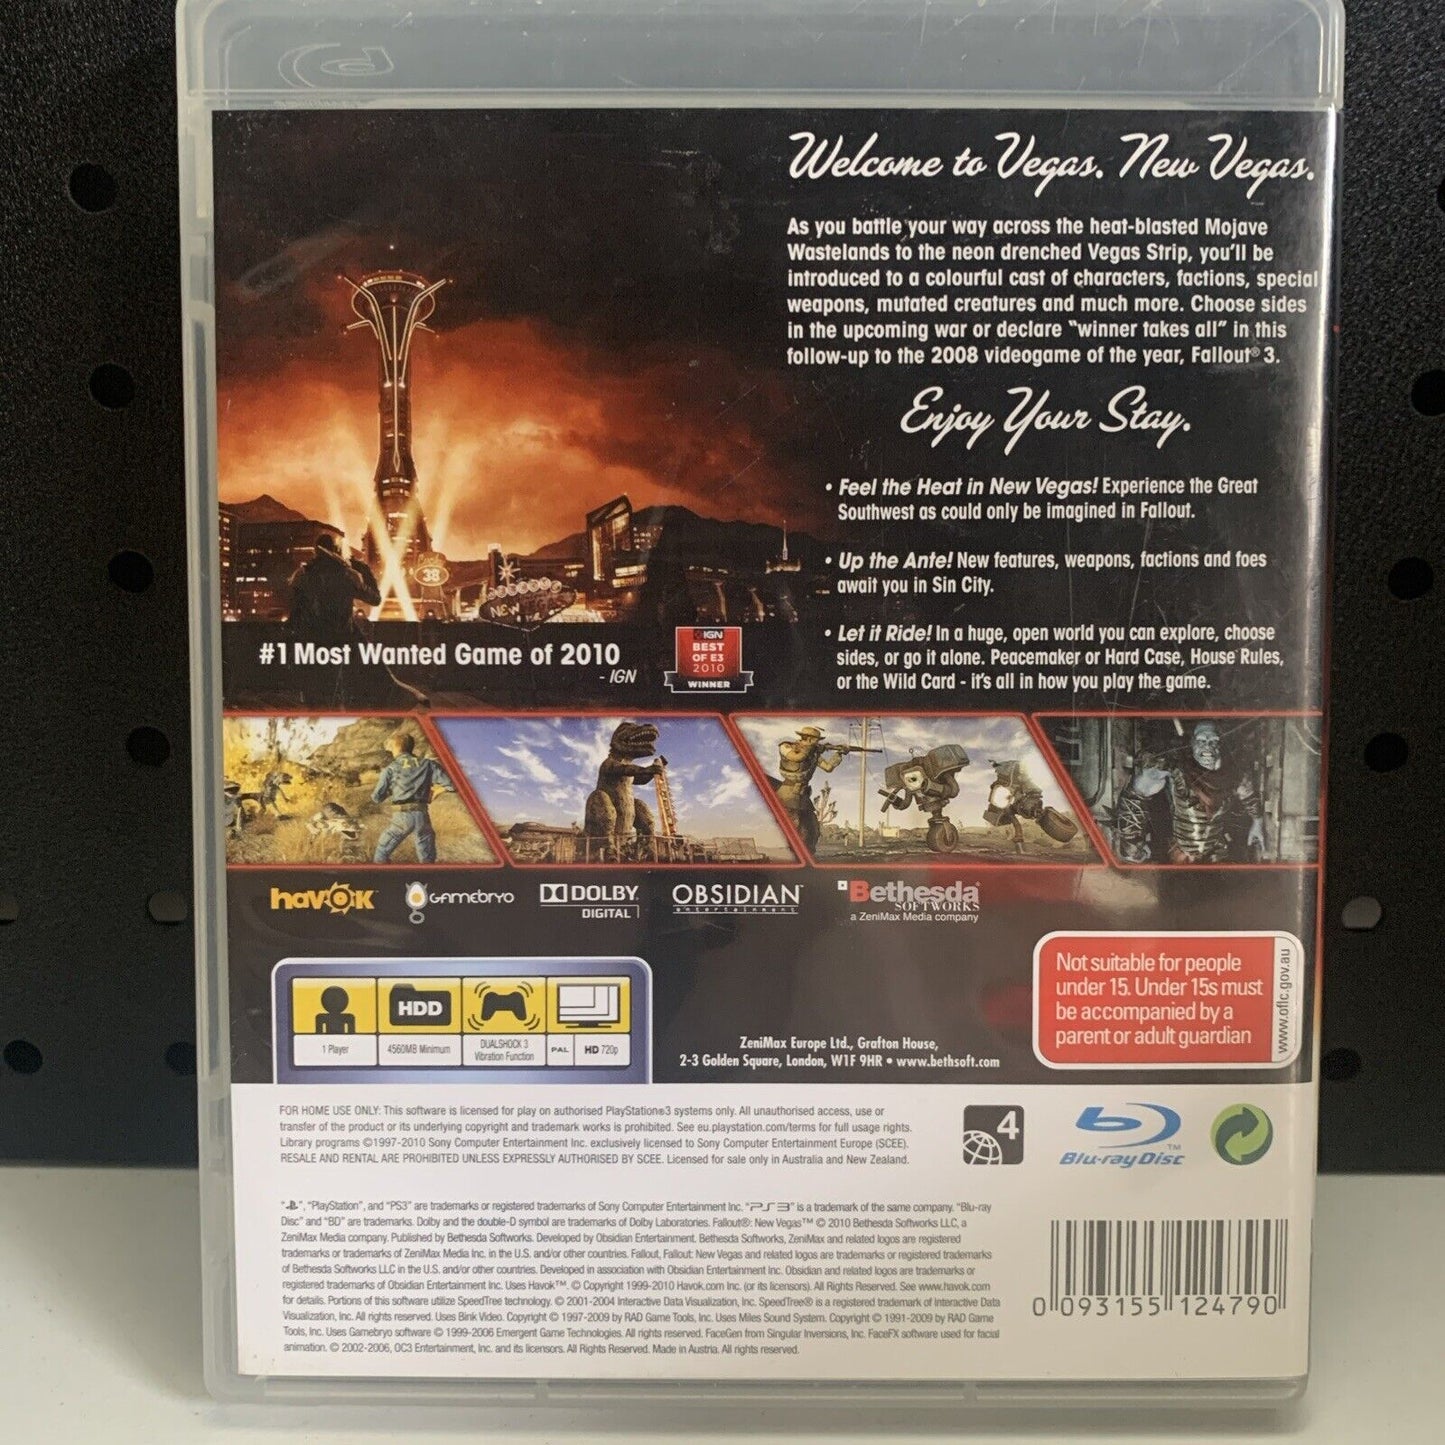 Fallout New Vegas PlayStation 3 PS3 Game